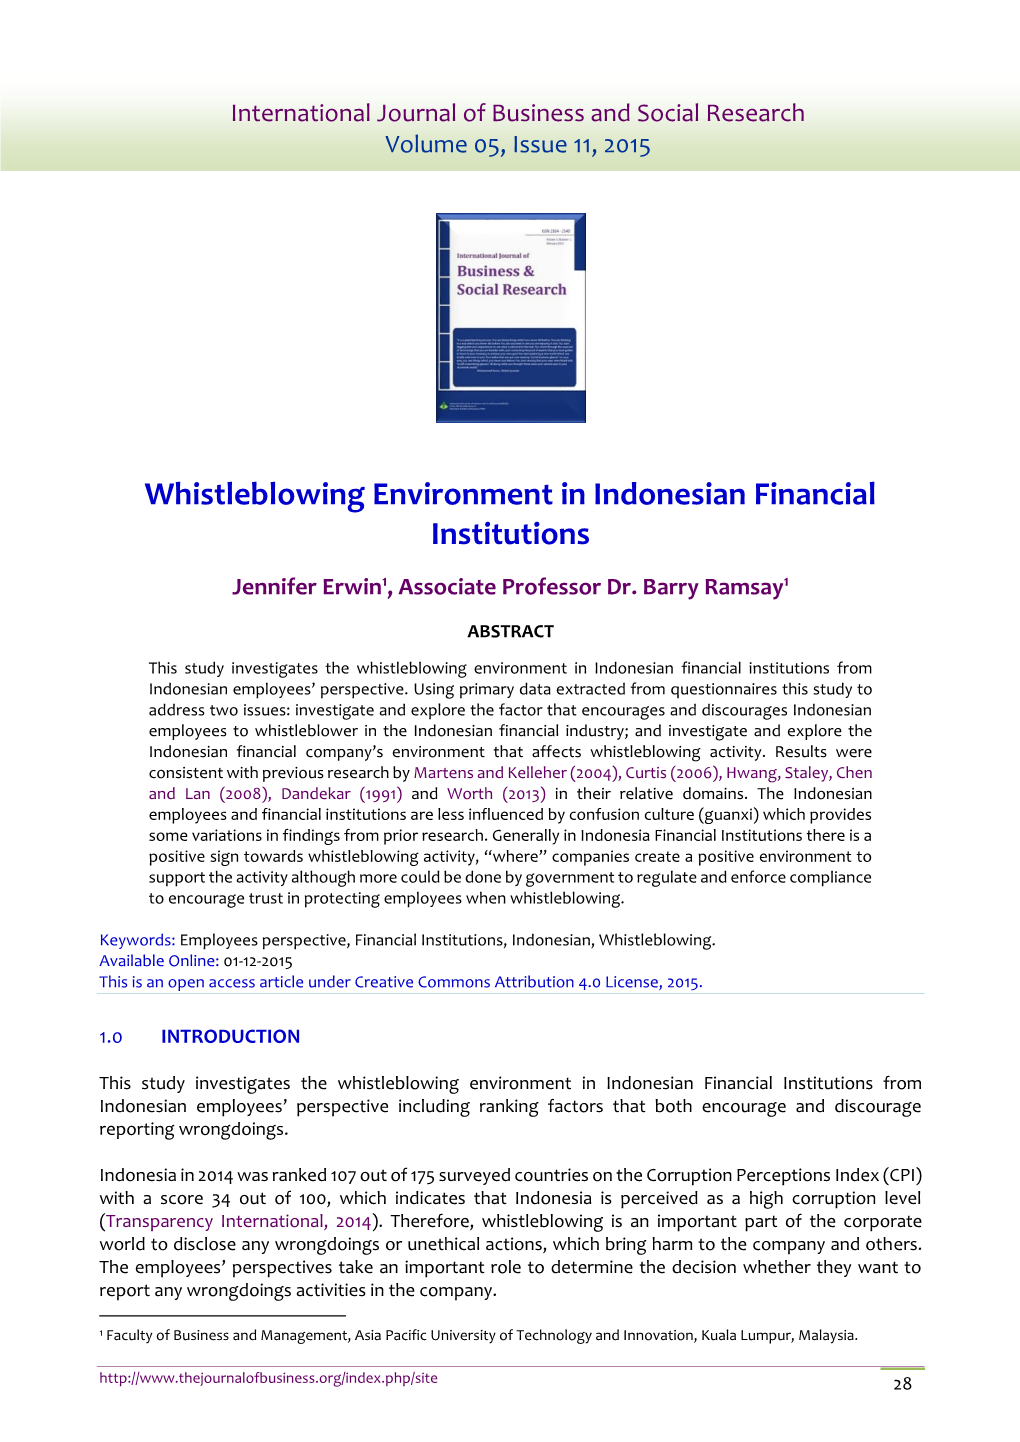 Whistleblowing Environment in Indonesian Financial Institutions